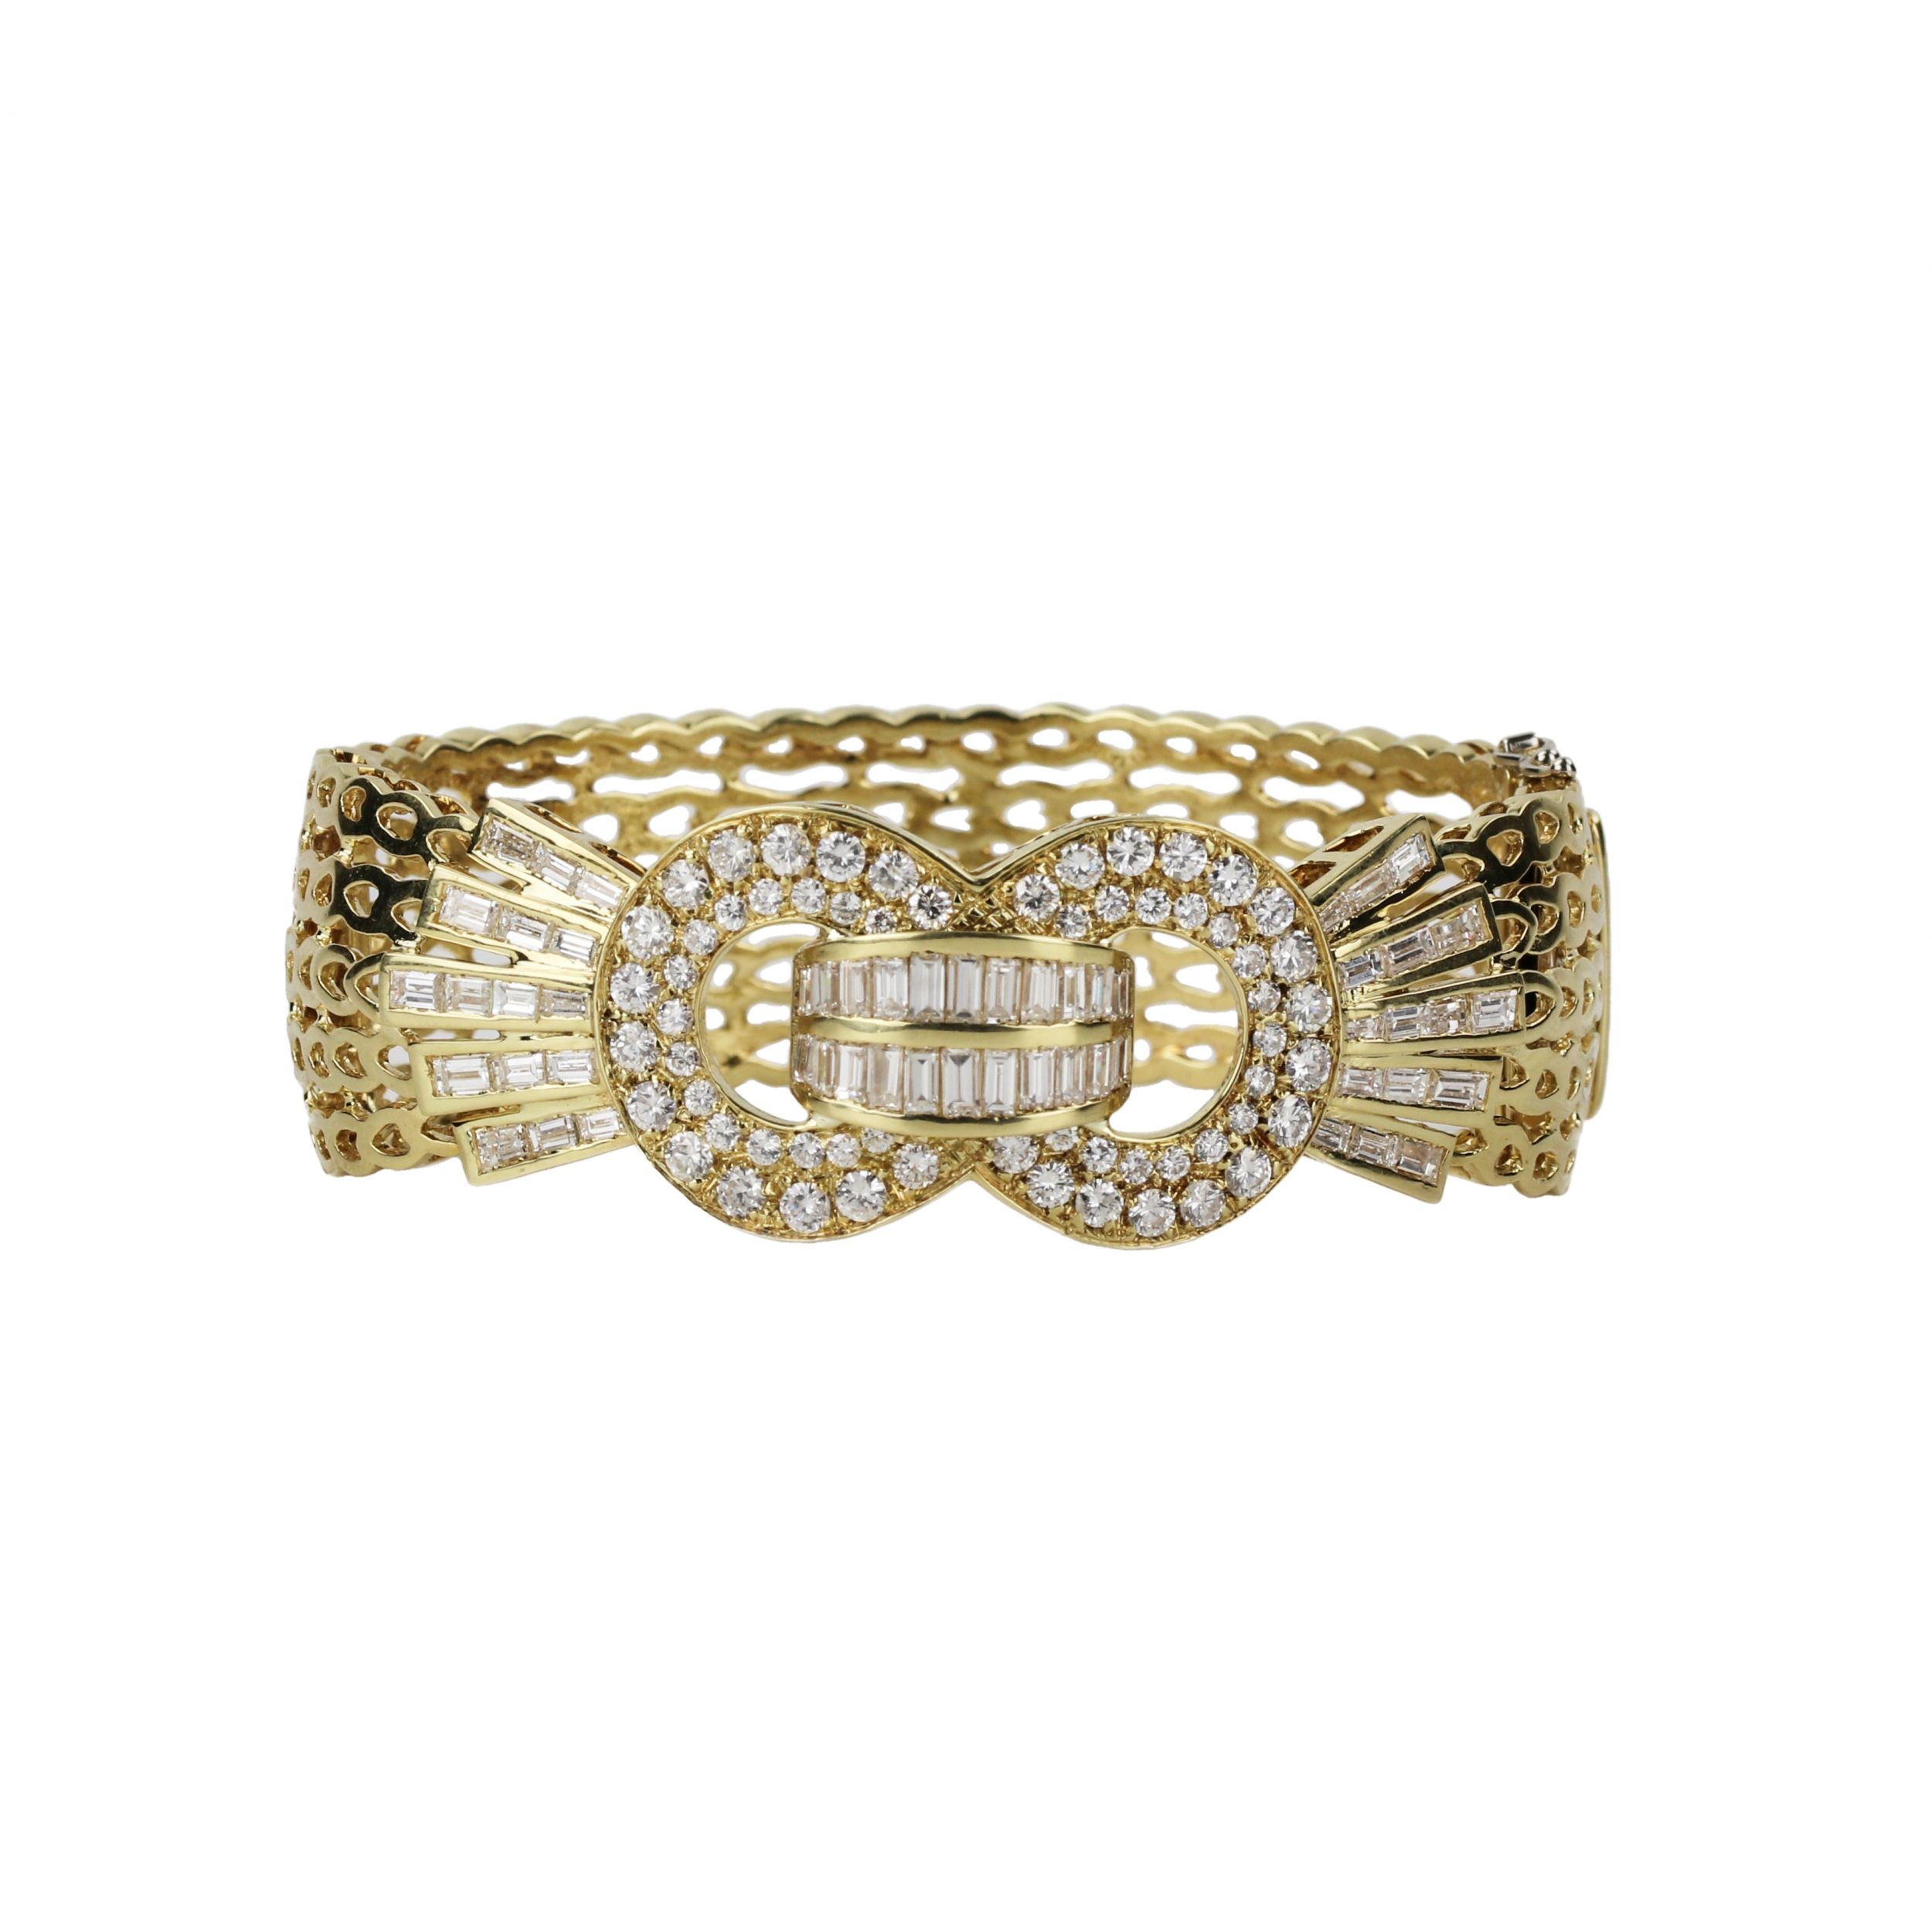 Gold bracelet with diamonds in the form of a belt. - Image 3 of 7